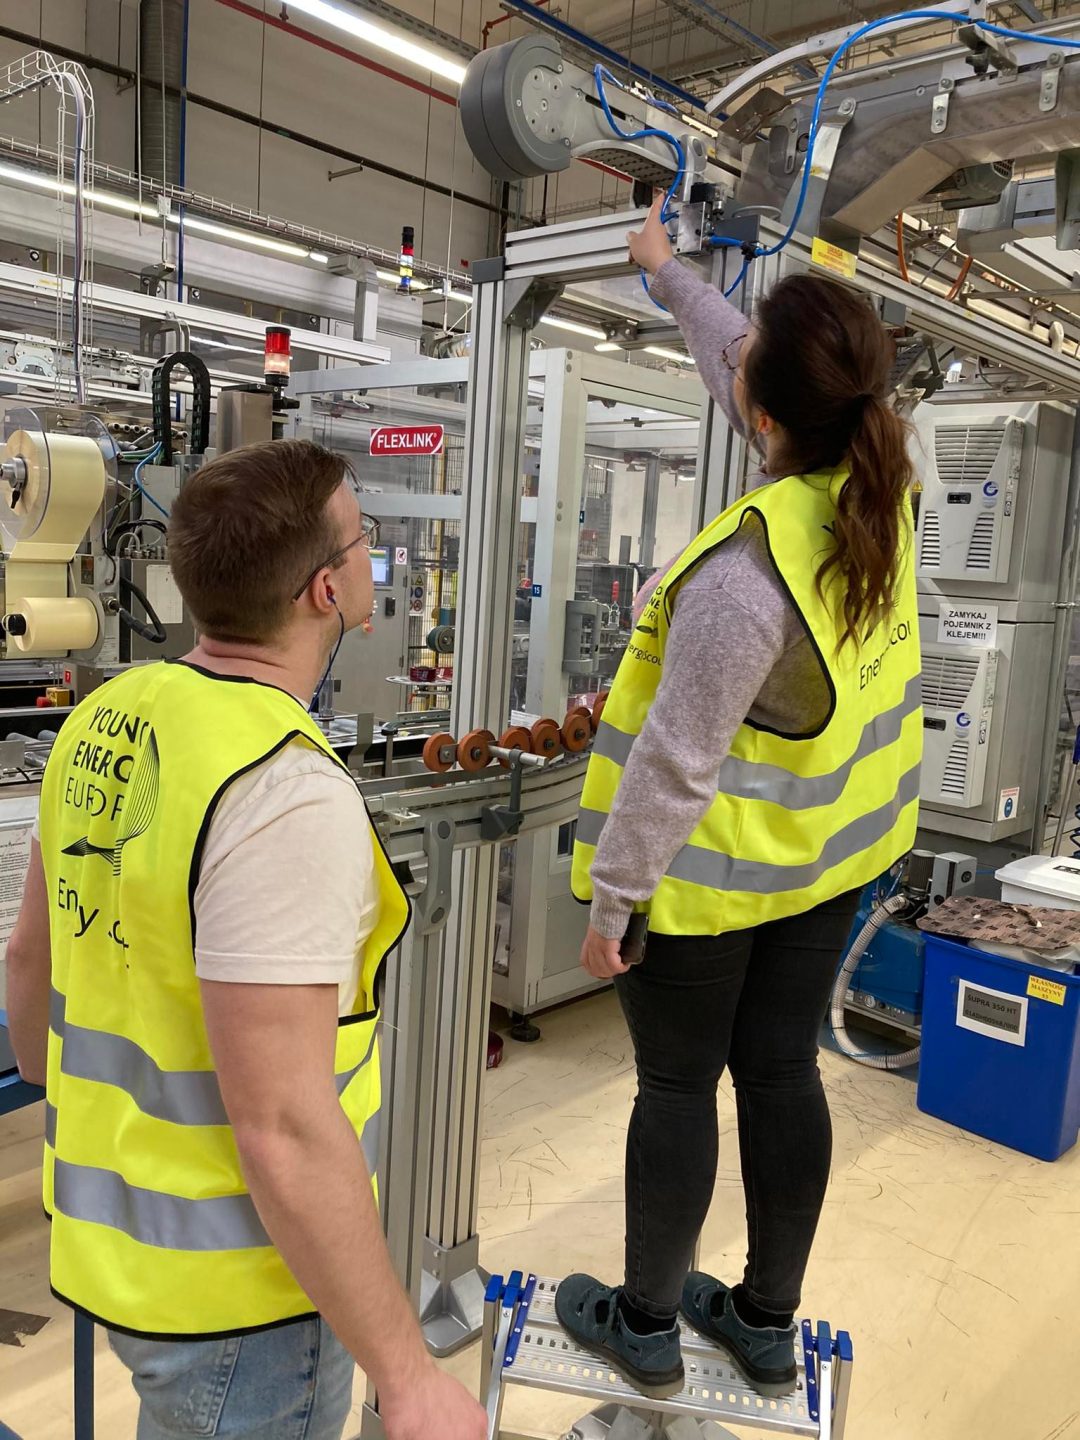 A man and a woman in yellow Young Energy Europe vests are next to the assembly line of a production room. The woman is pointing at the top of a connection from the assembly line with cables and gears, the man is also looking at it.